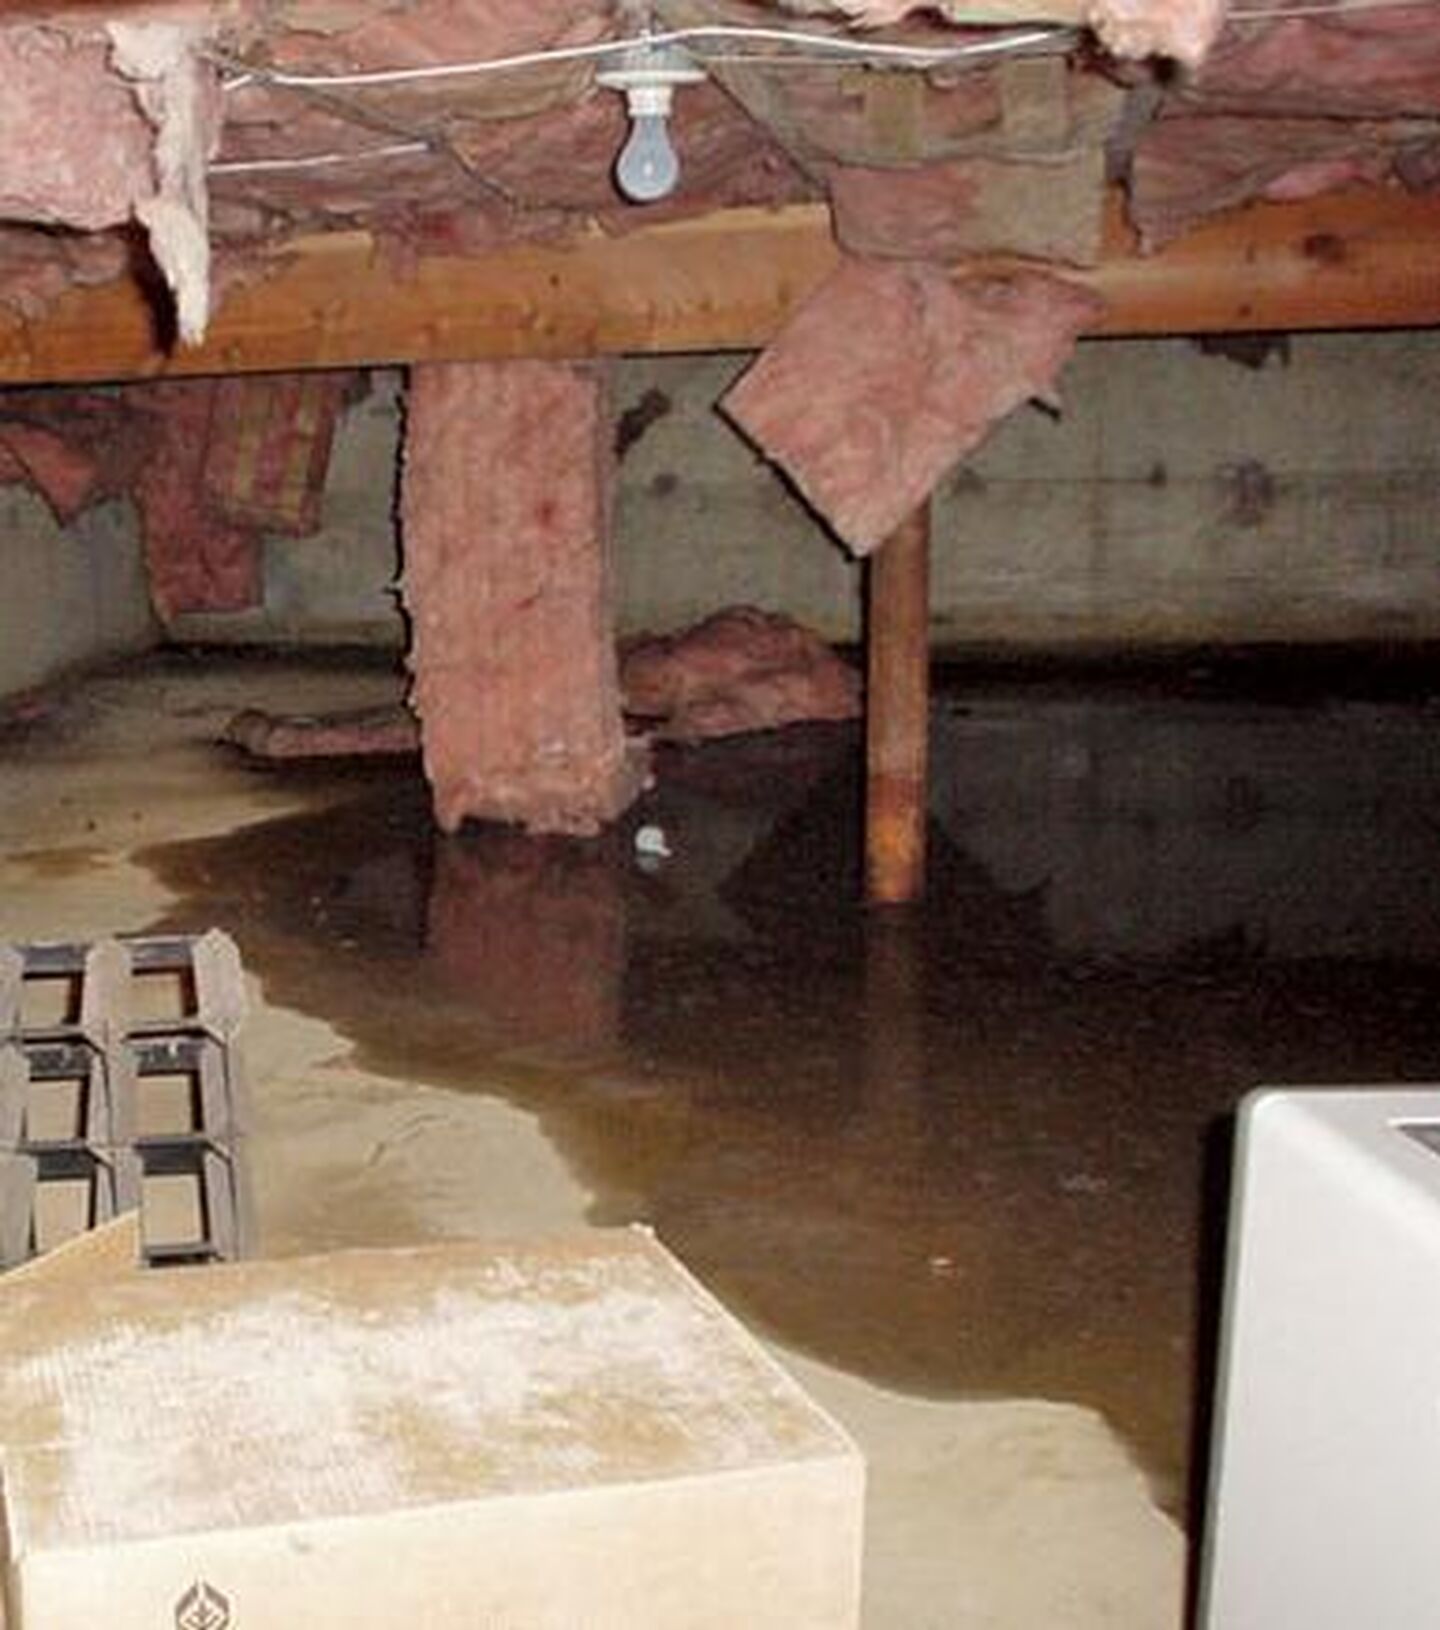 Crawl Space Encapsulation: What if I Don’t Use my Crawl Space?